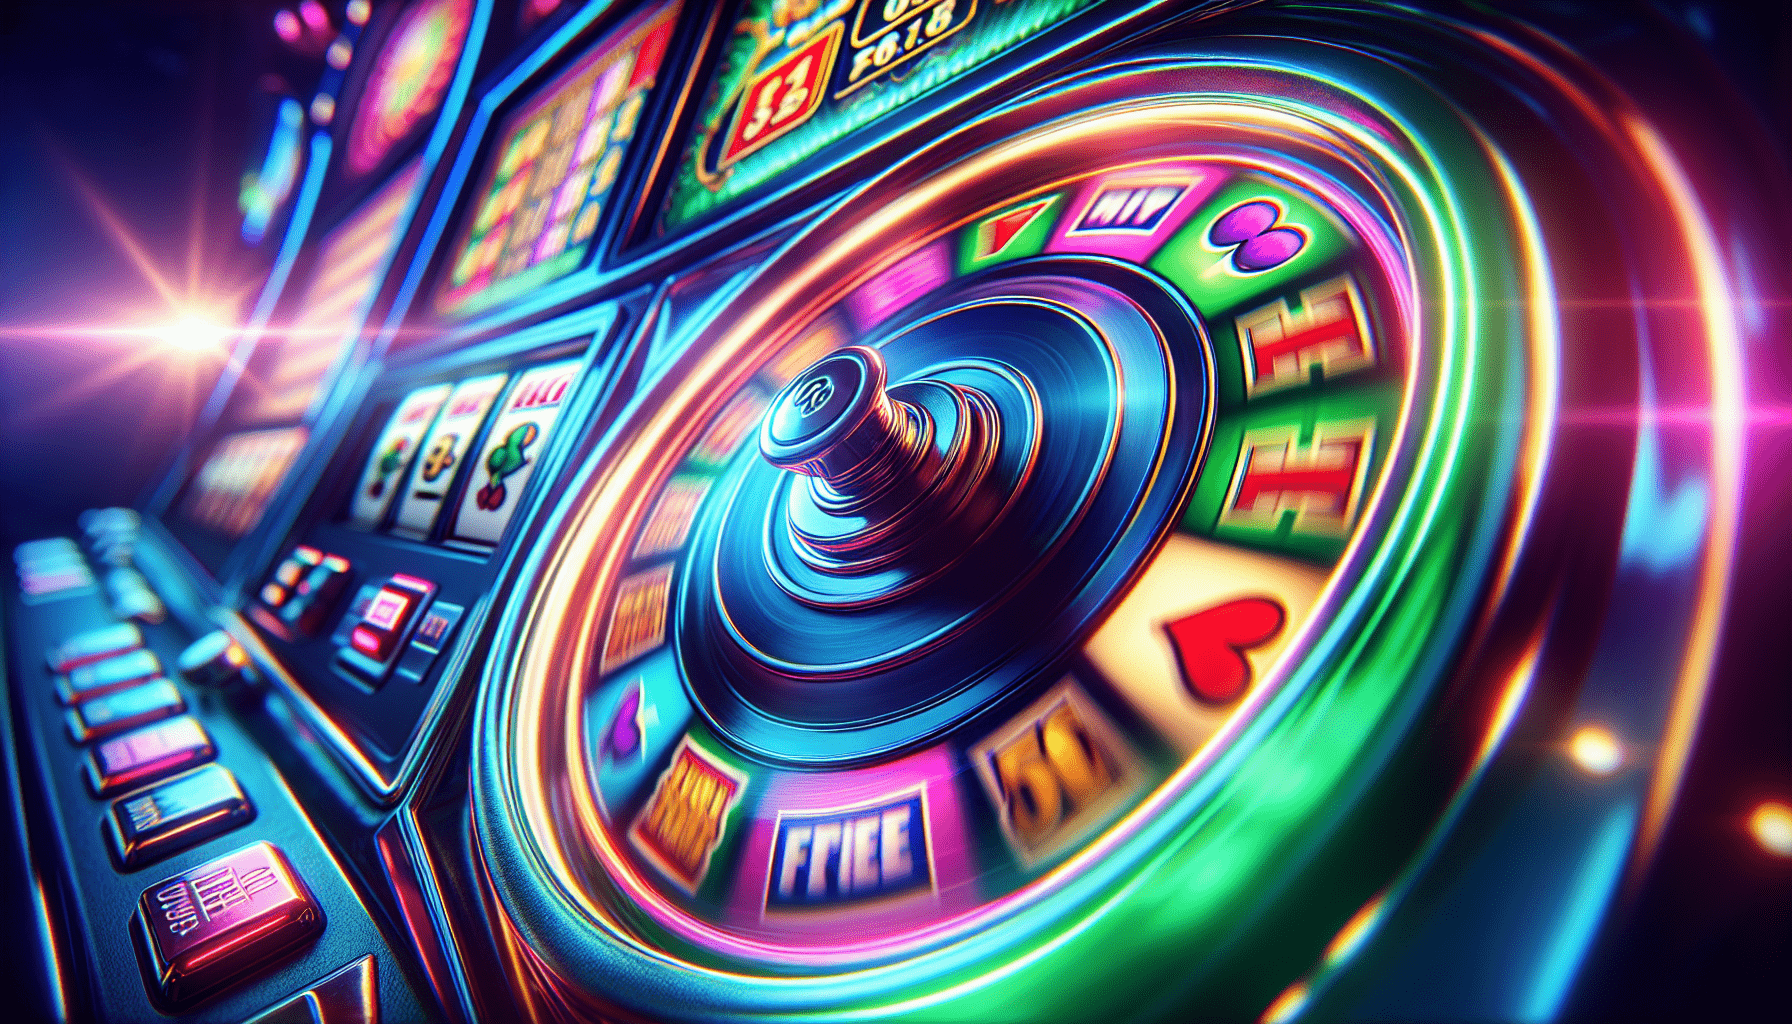 How Does Free Play Work On Slots?